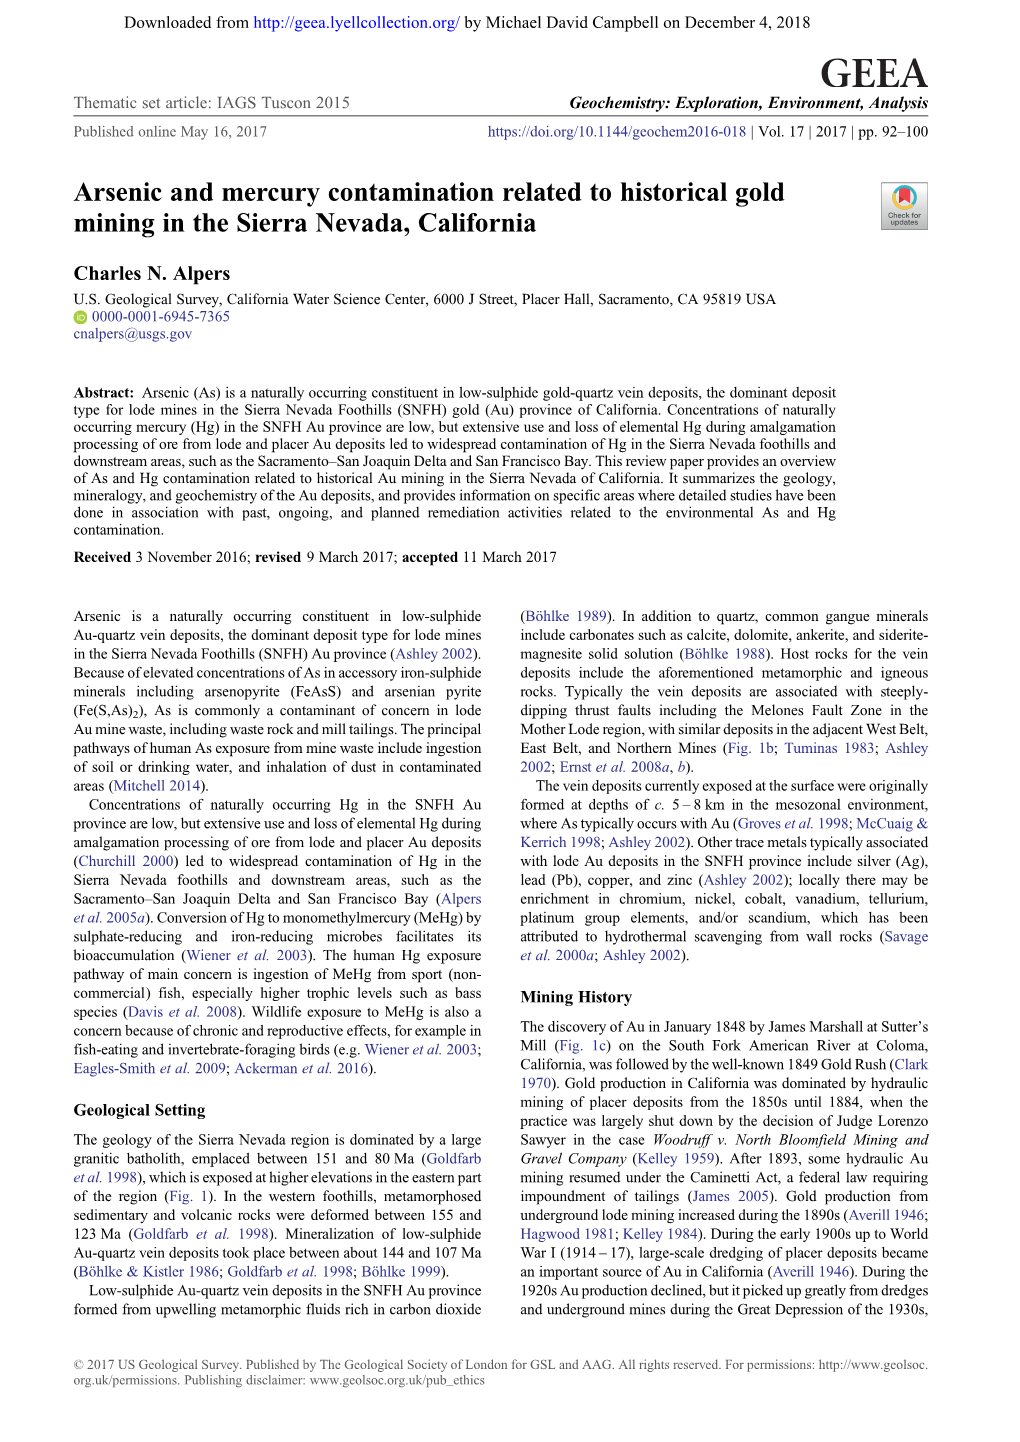 Arsenic and Mercury Contamination Related to Historical Gold Mining in the Sierra Nevada, California